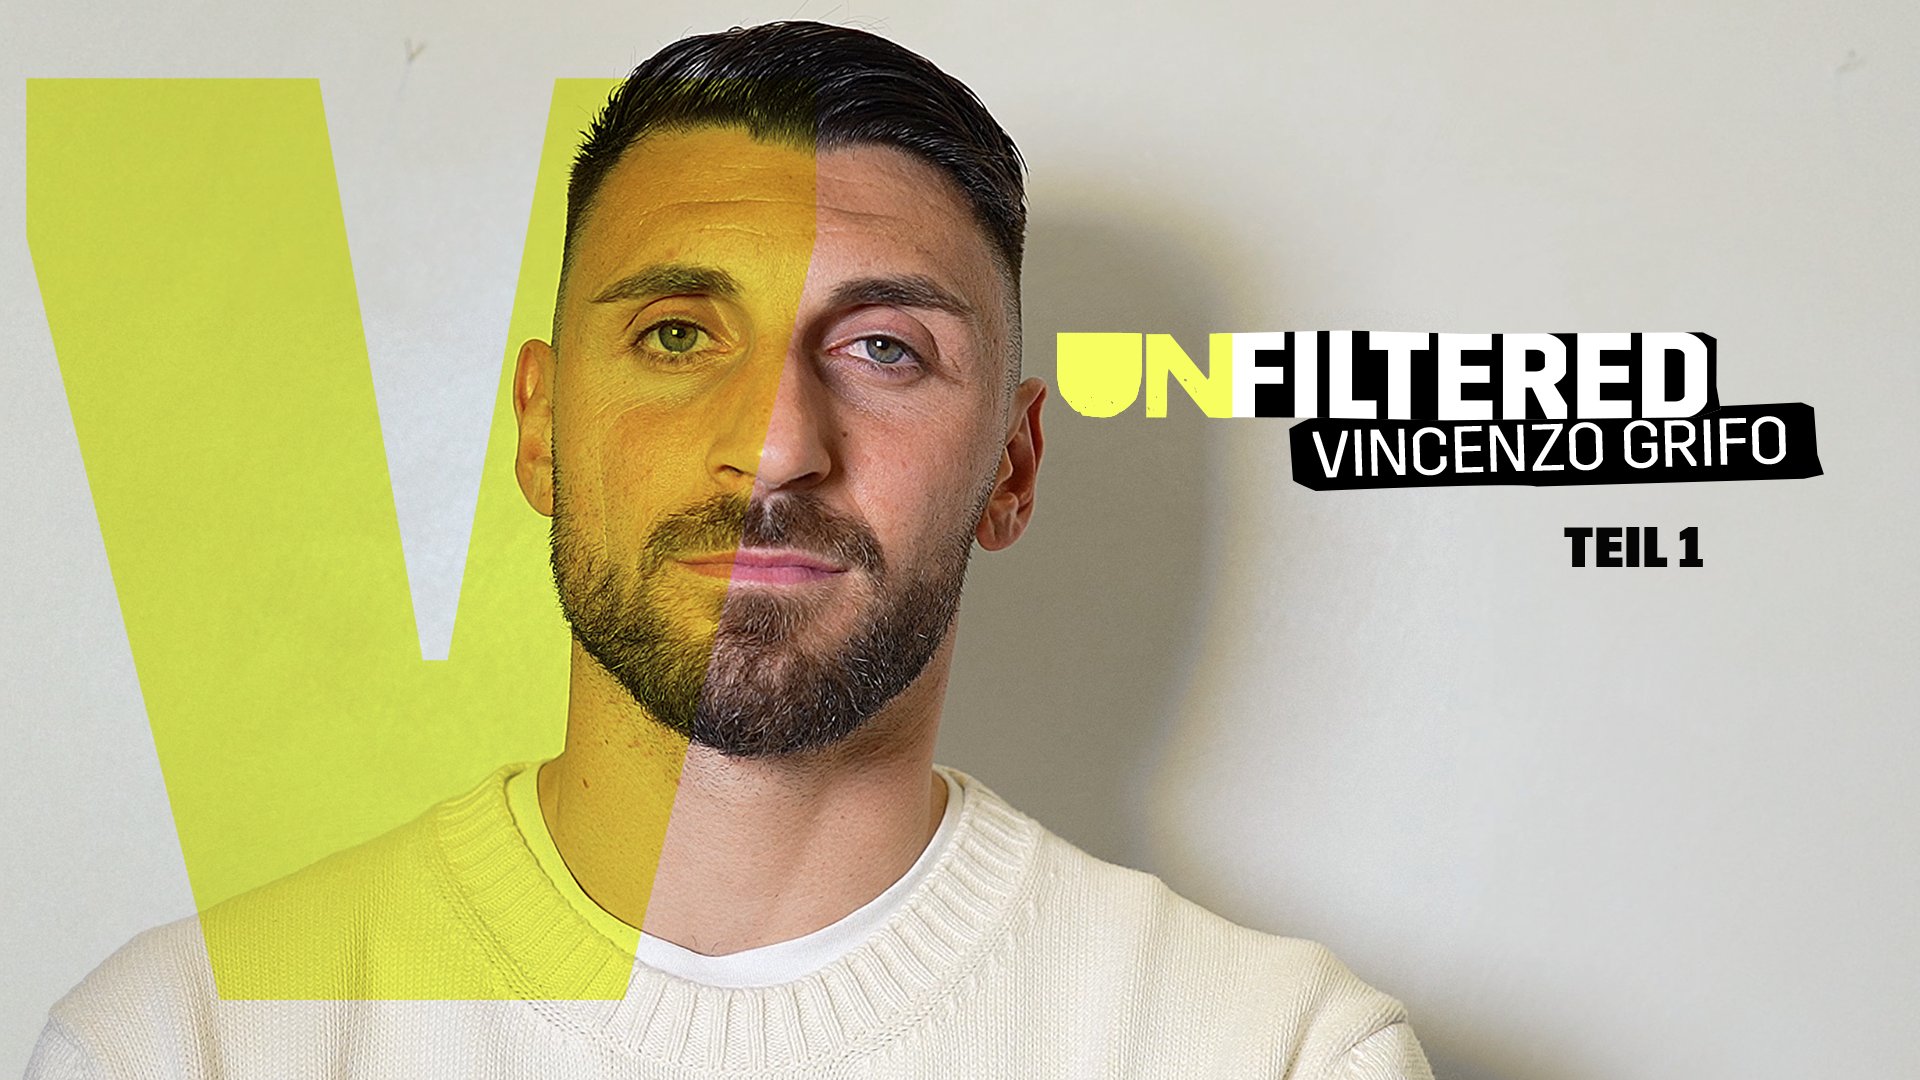 Vincenzo Grifo DAZN Unfiltered